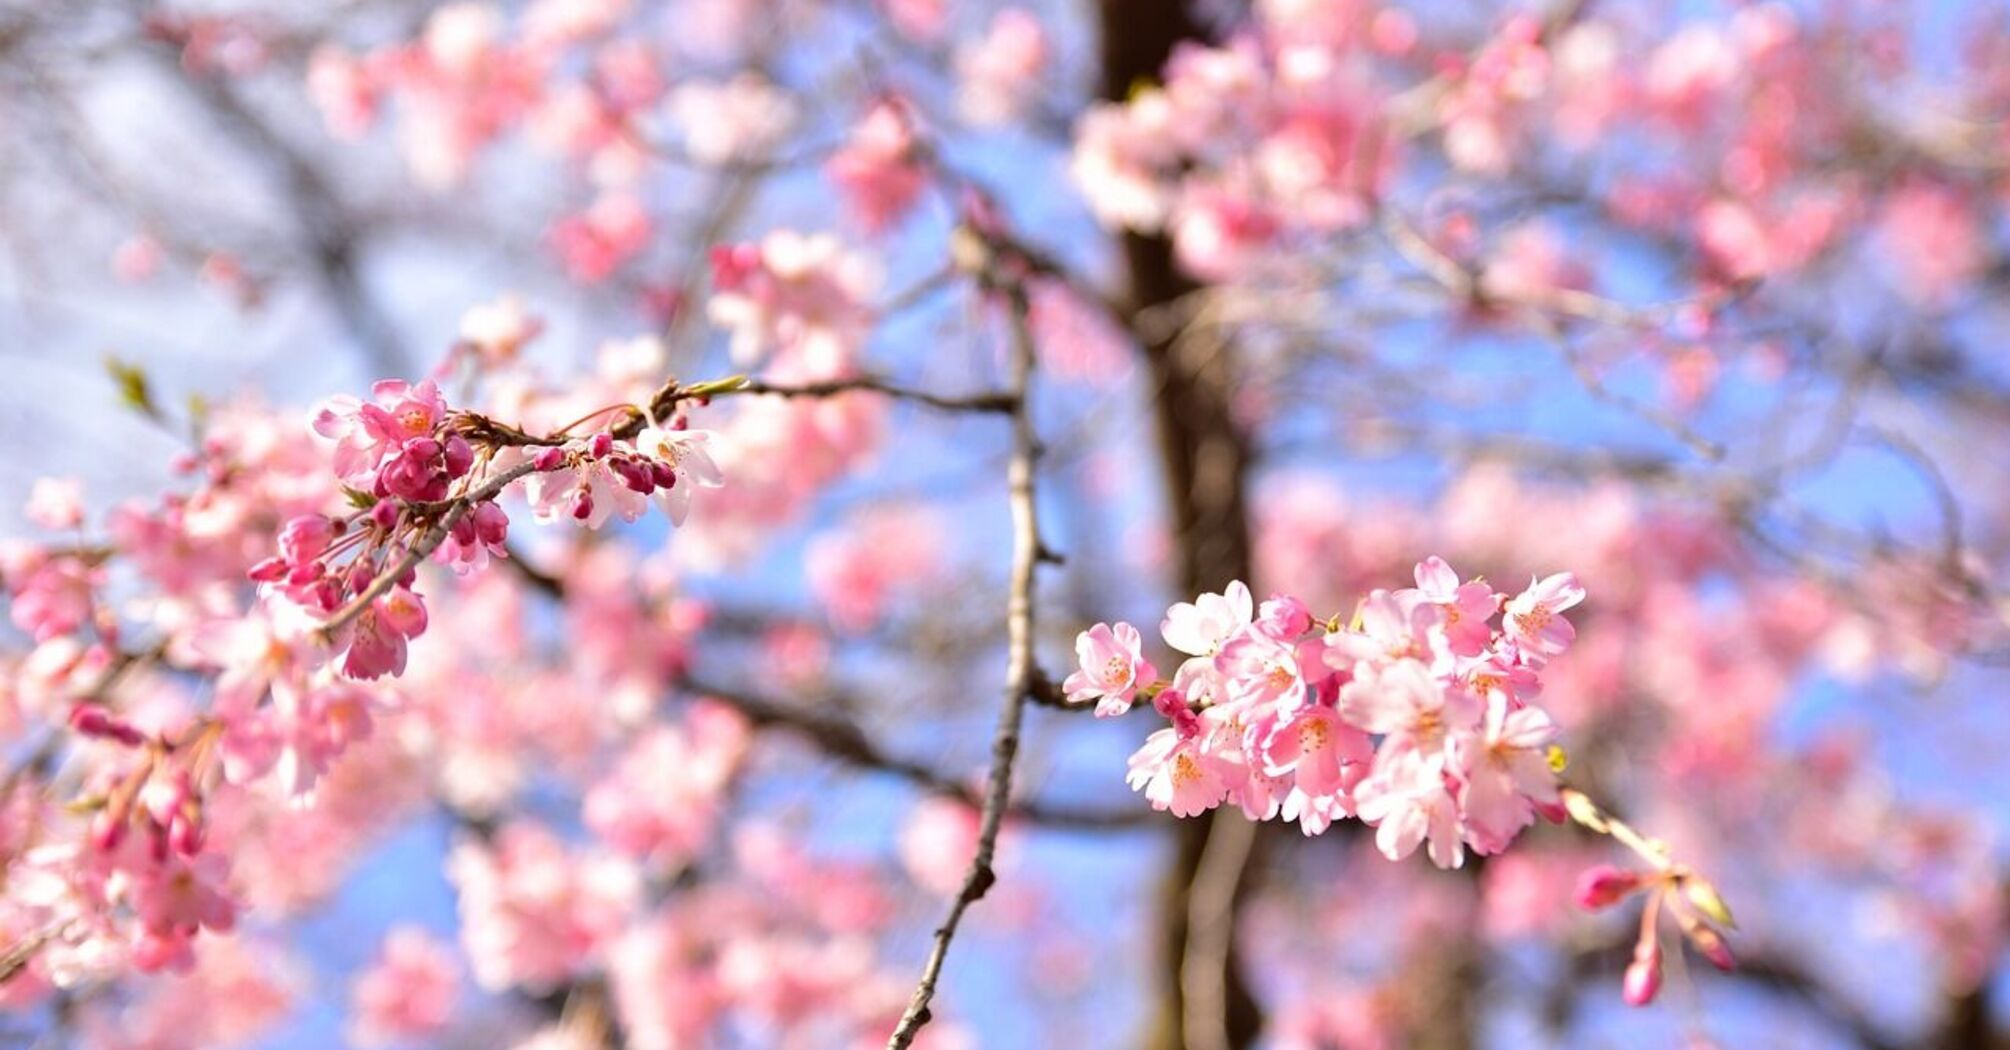 Enjoy the cherry blossom and incredible food during your trip to Tokyo